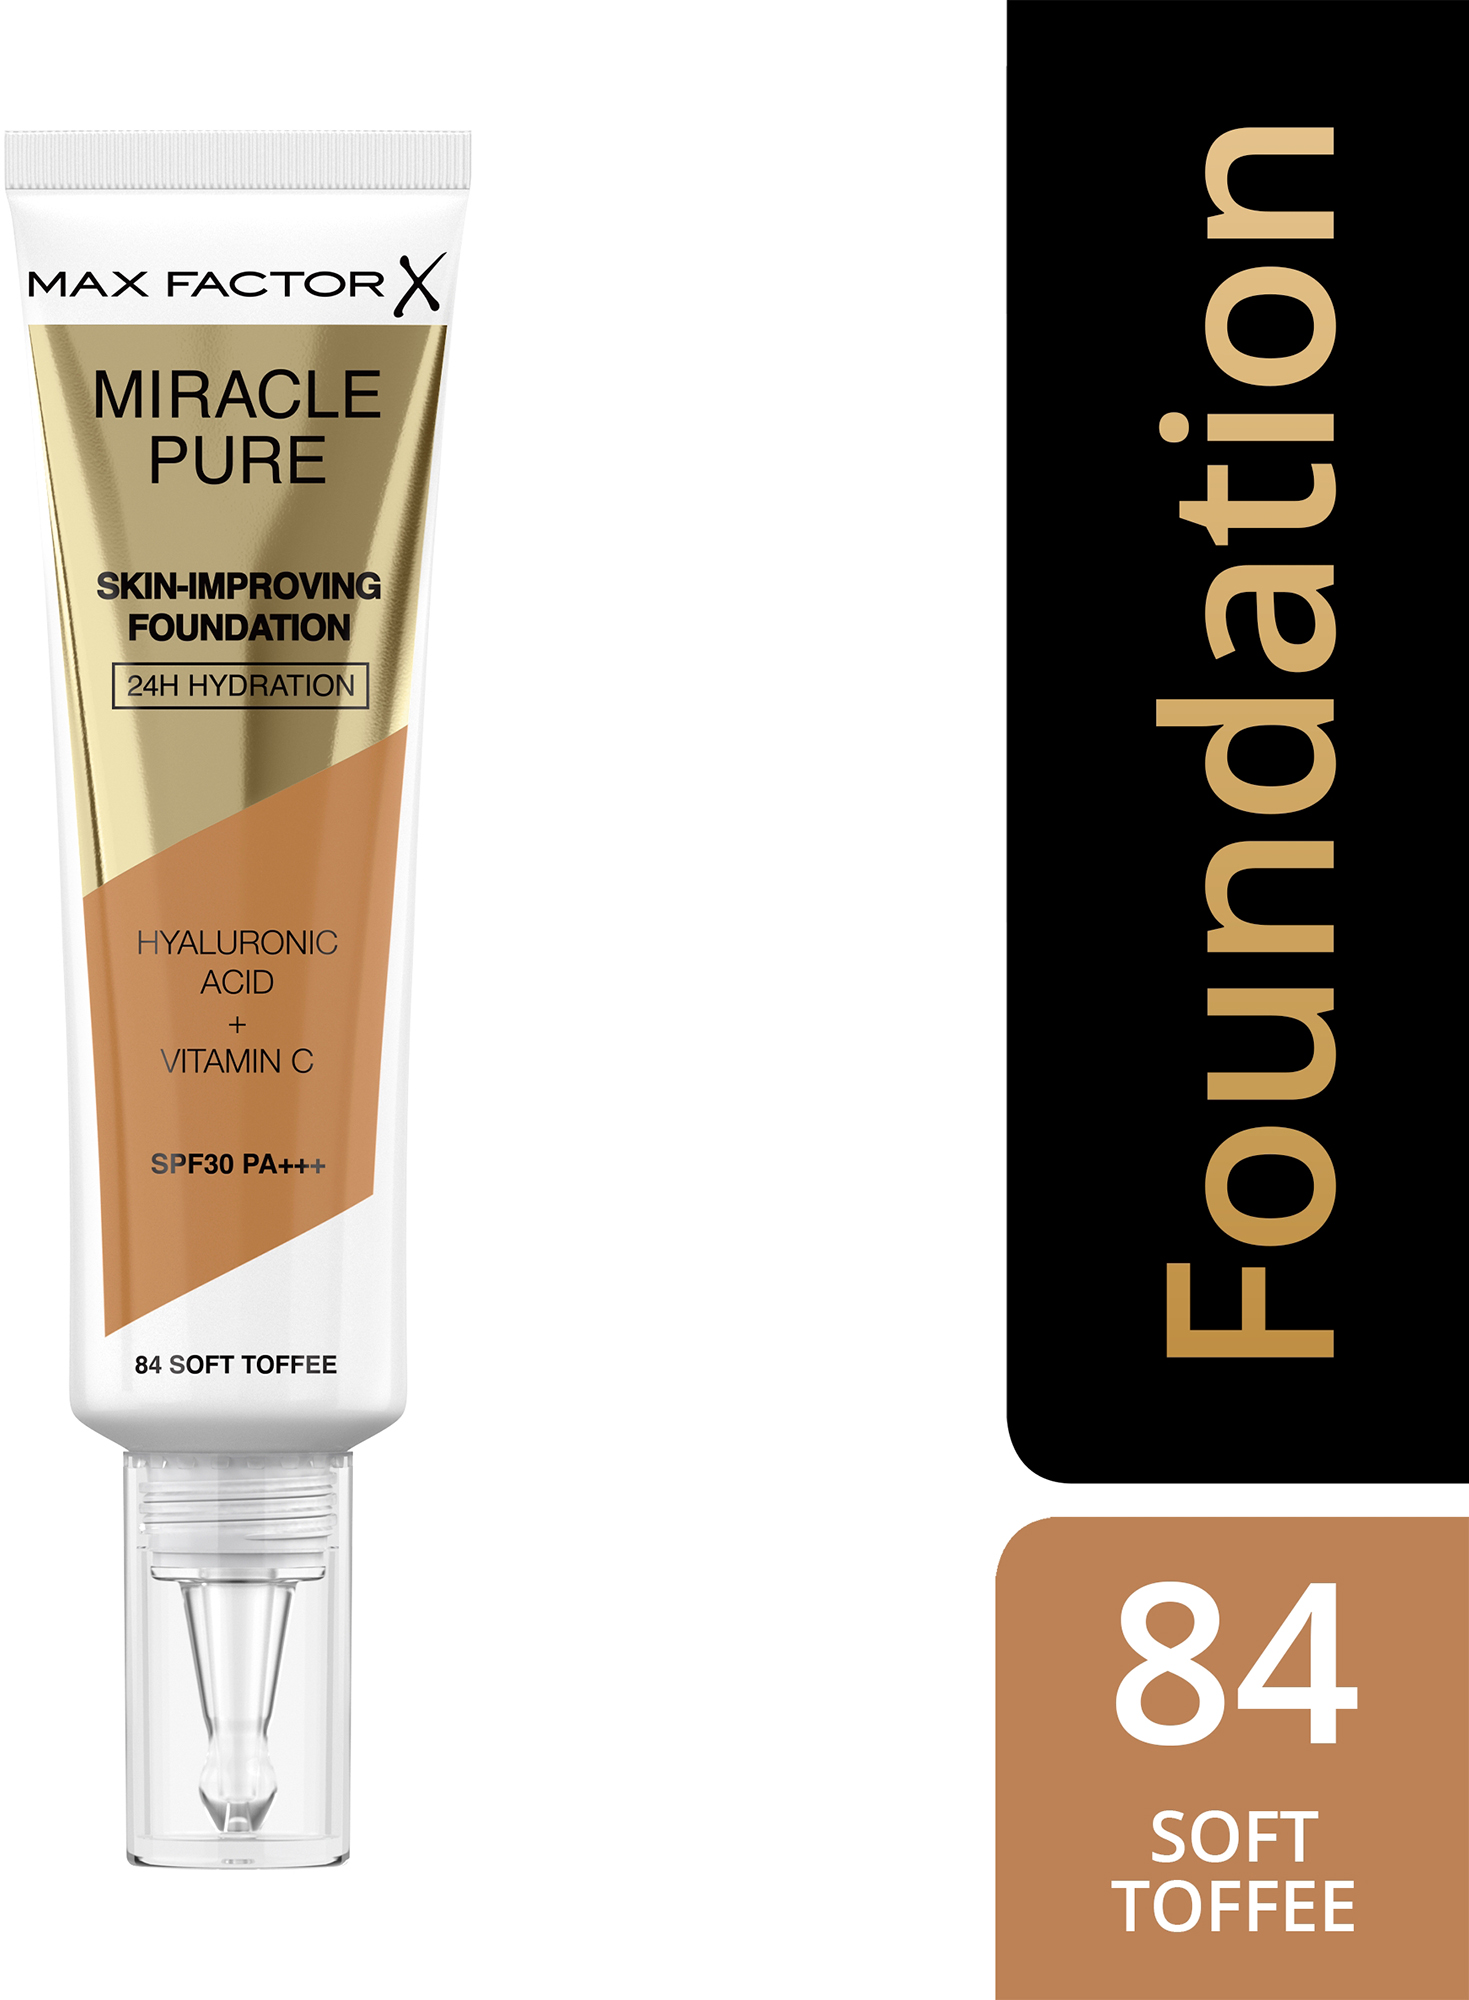 Max Factor Miracle Pure Skin-Improving Foundation 55 Beige